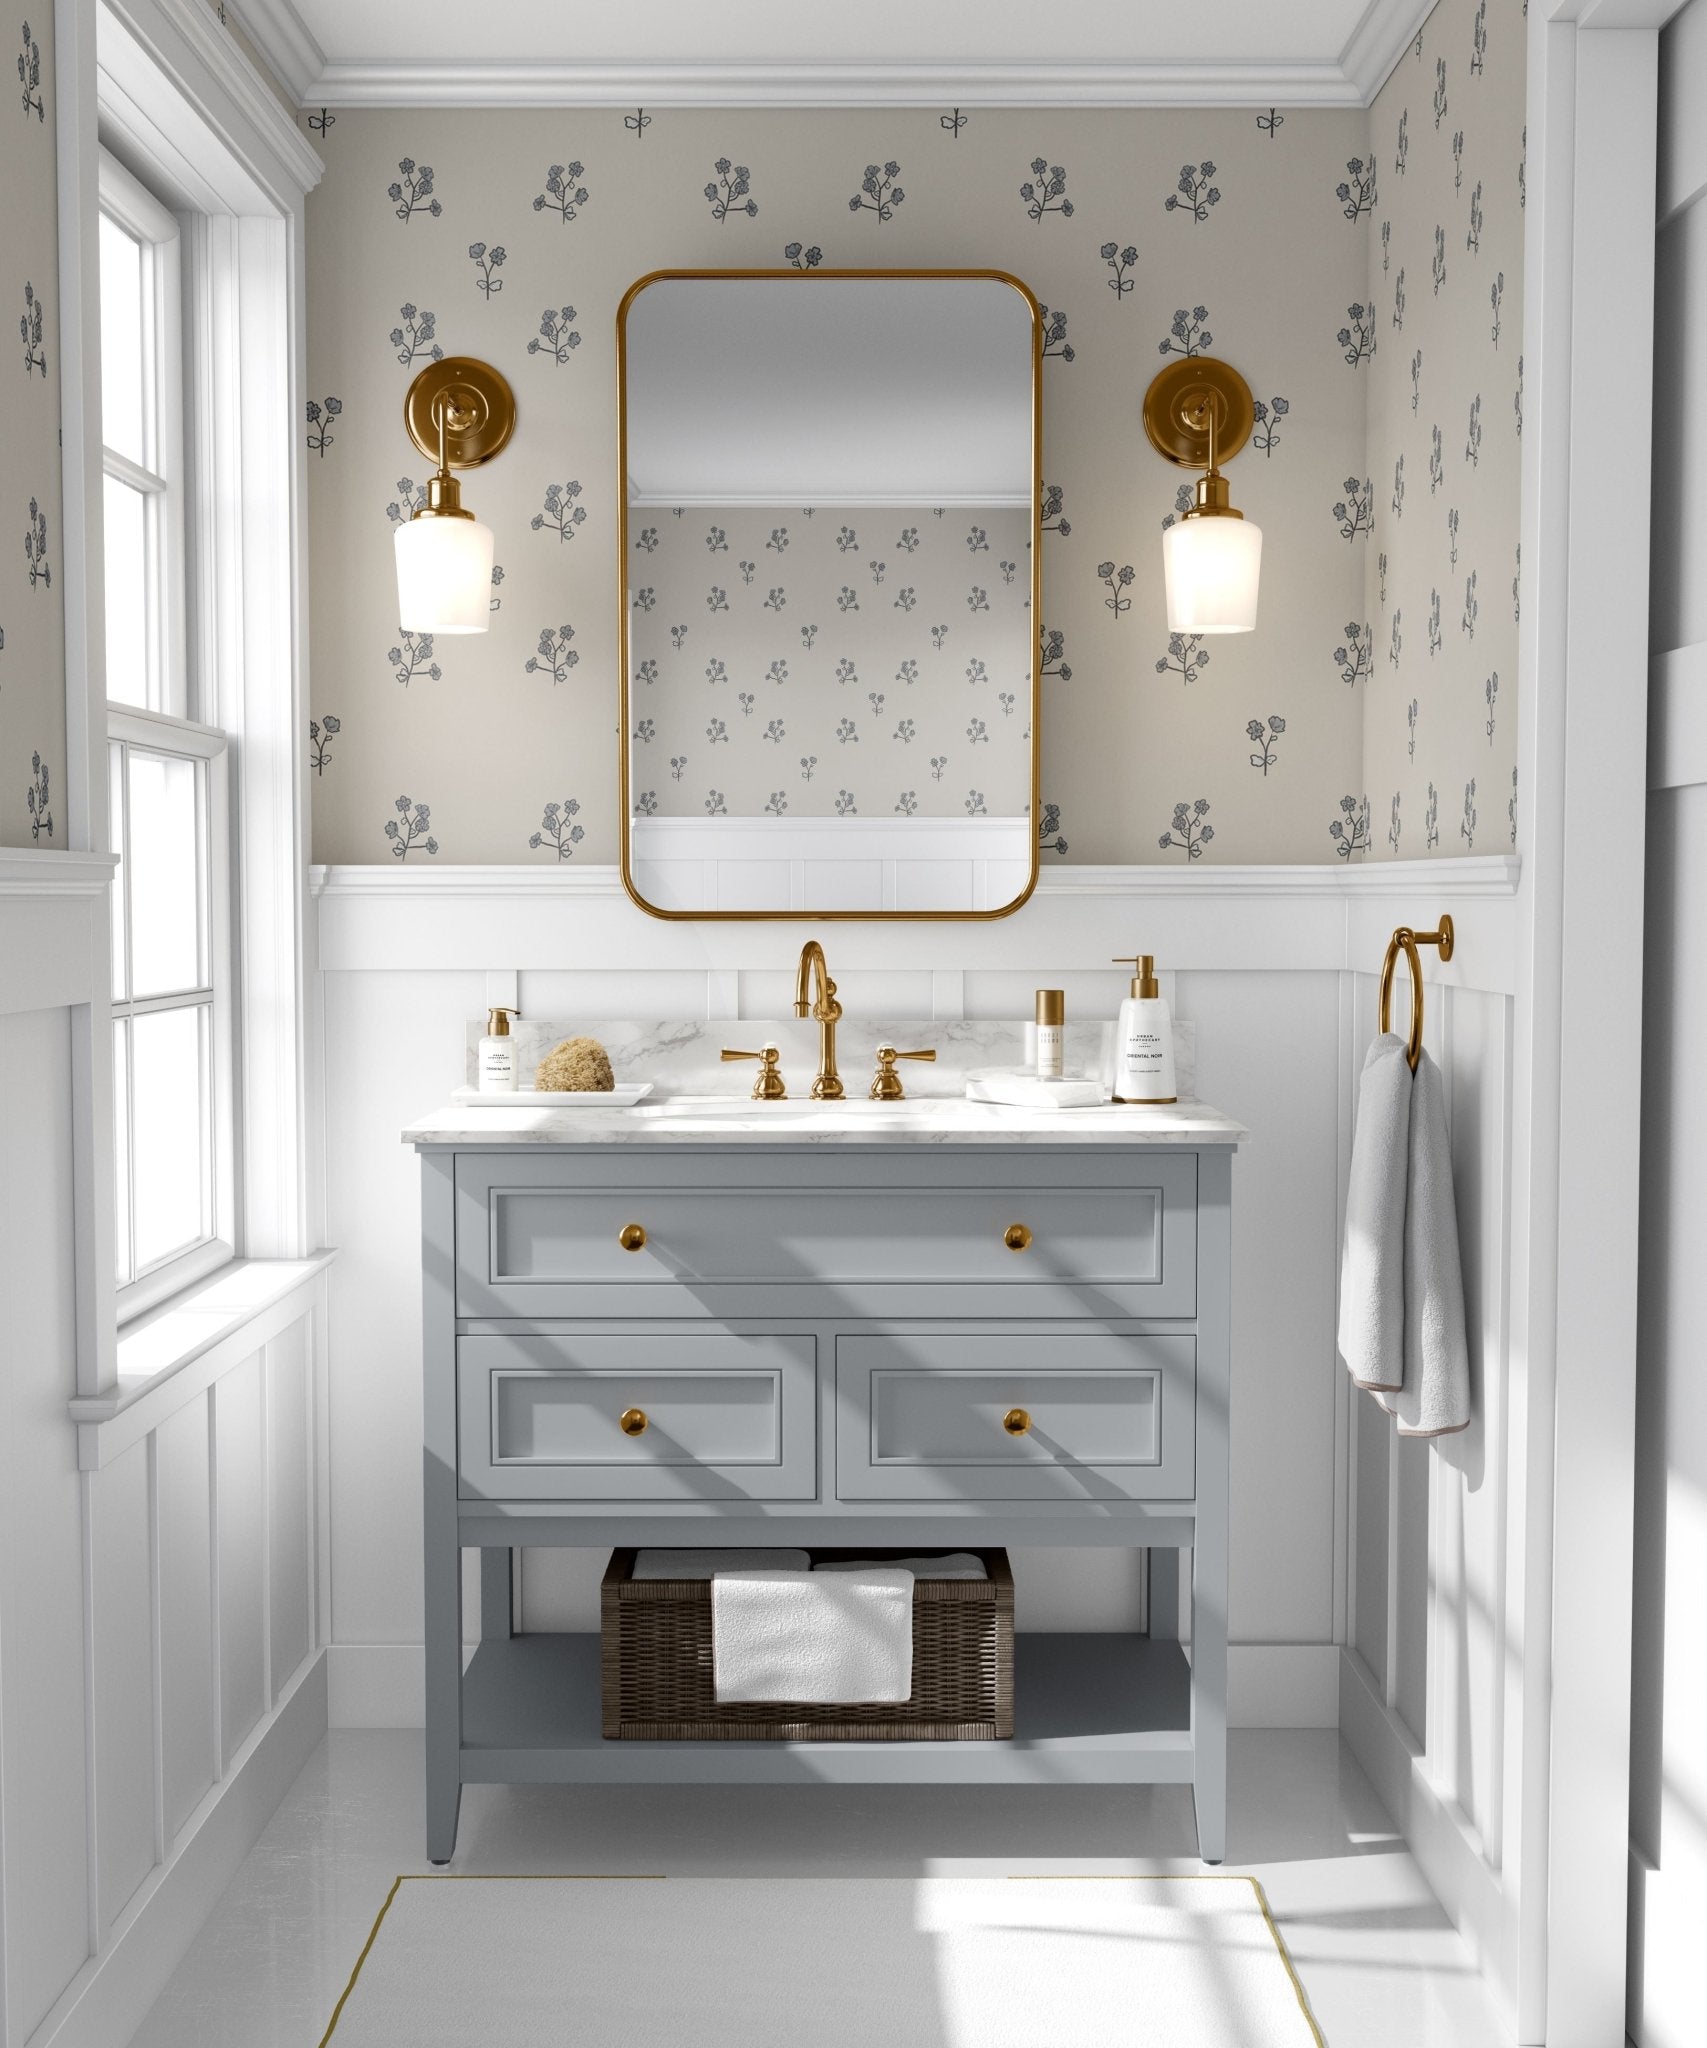 A bright bathroom with walls covered in bluebell flower wallpaper matching the previous image. The room features a light blue vanity with golden knobs, a marble top, golden faucets, and a large mirror with a golden frame.